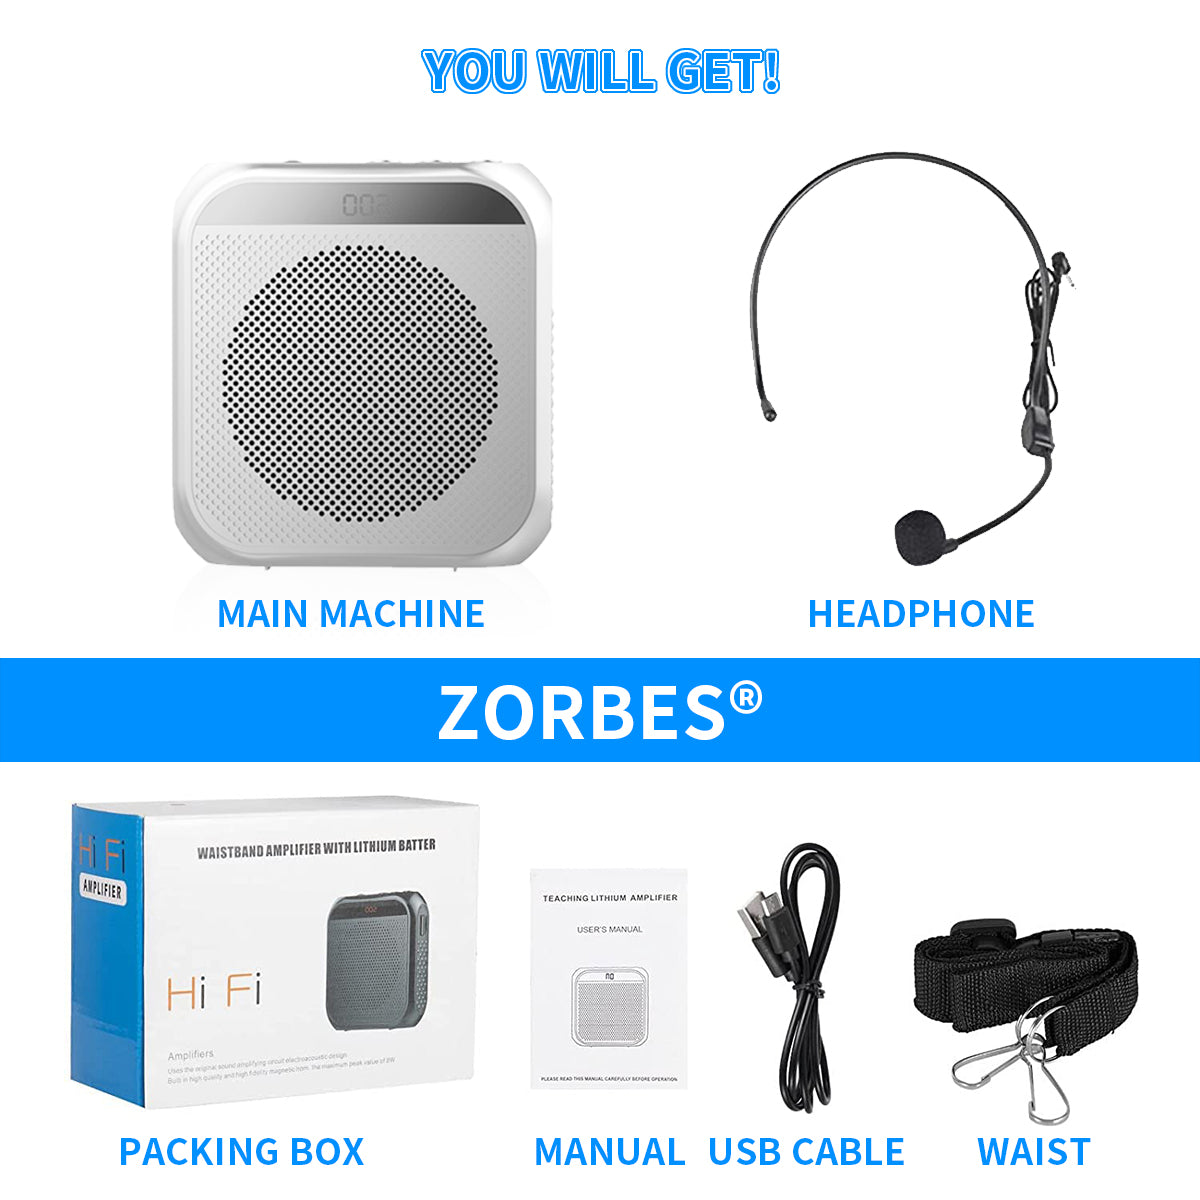 ZORBES Voice Amplifier for Teachers - Microphone Headset Set 2200 mAh, with Headset Microphone Support TF Card/U Flash Disk, Portable Voice Amplifier for Teachers, tour guide, coach, speaker